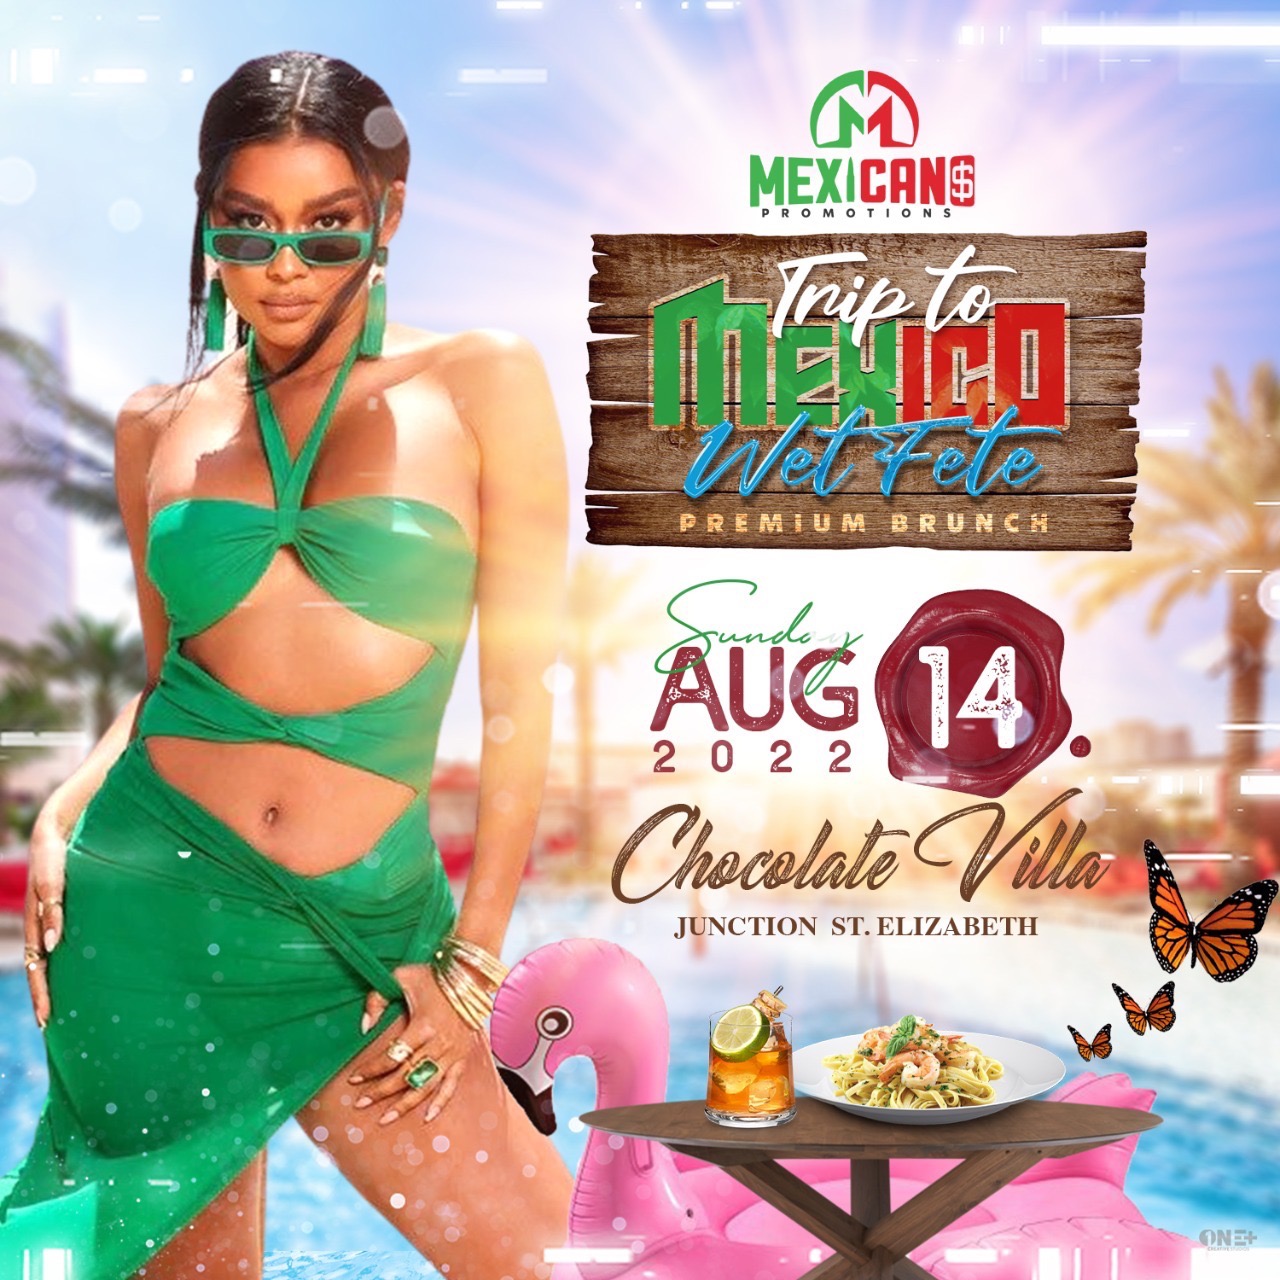 Trip to Mexico wet fete brunch edition